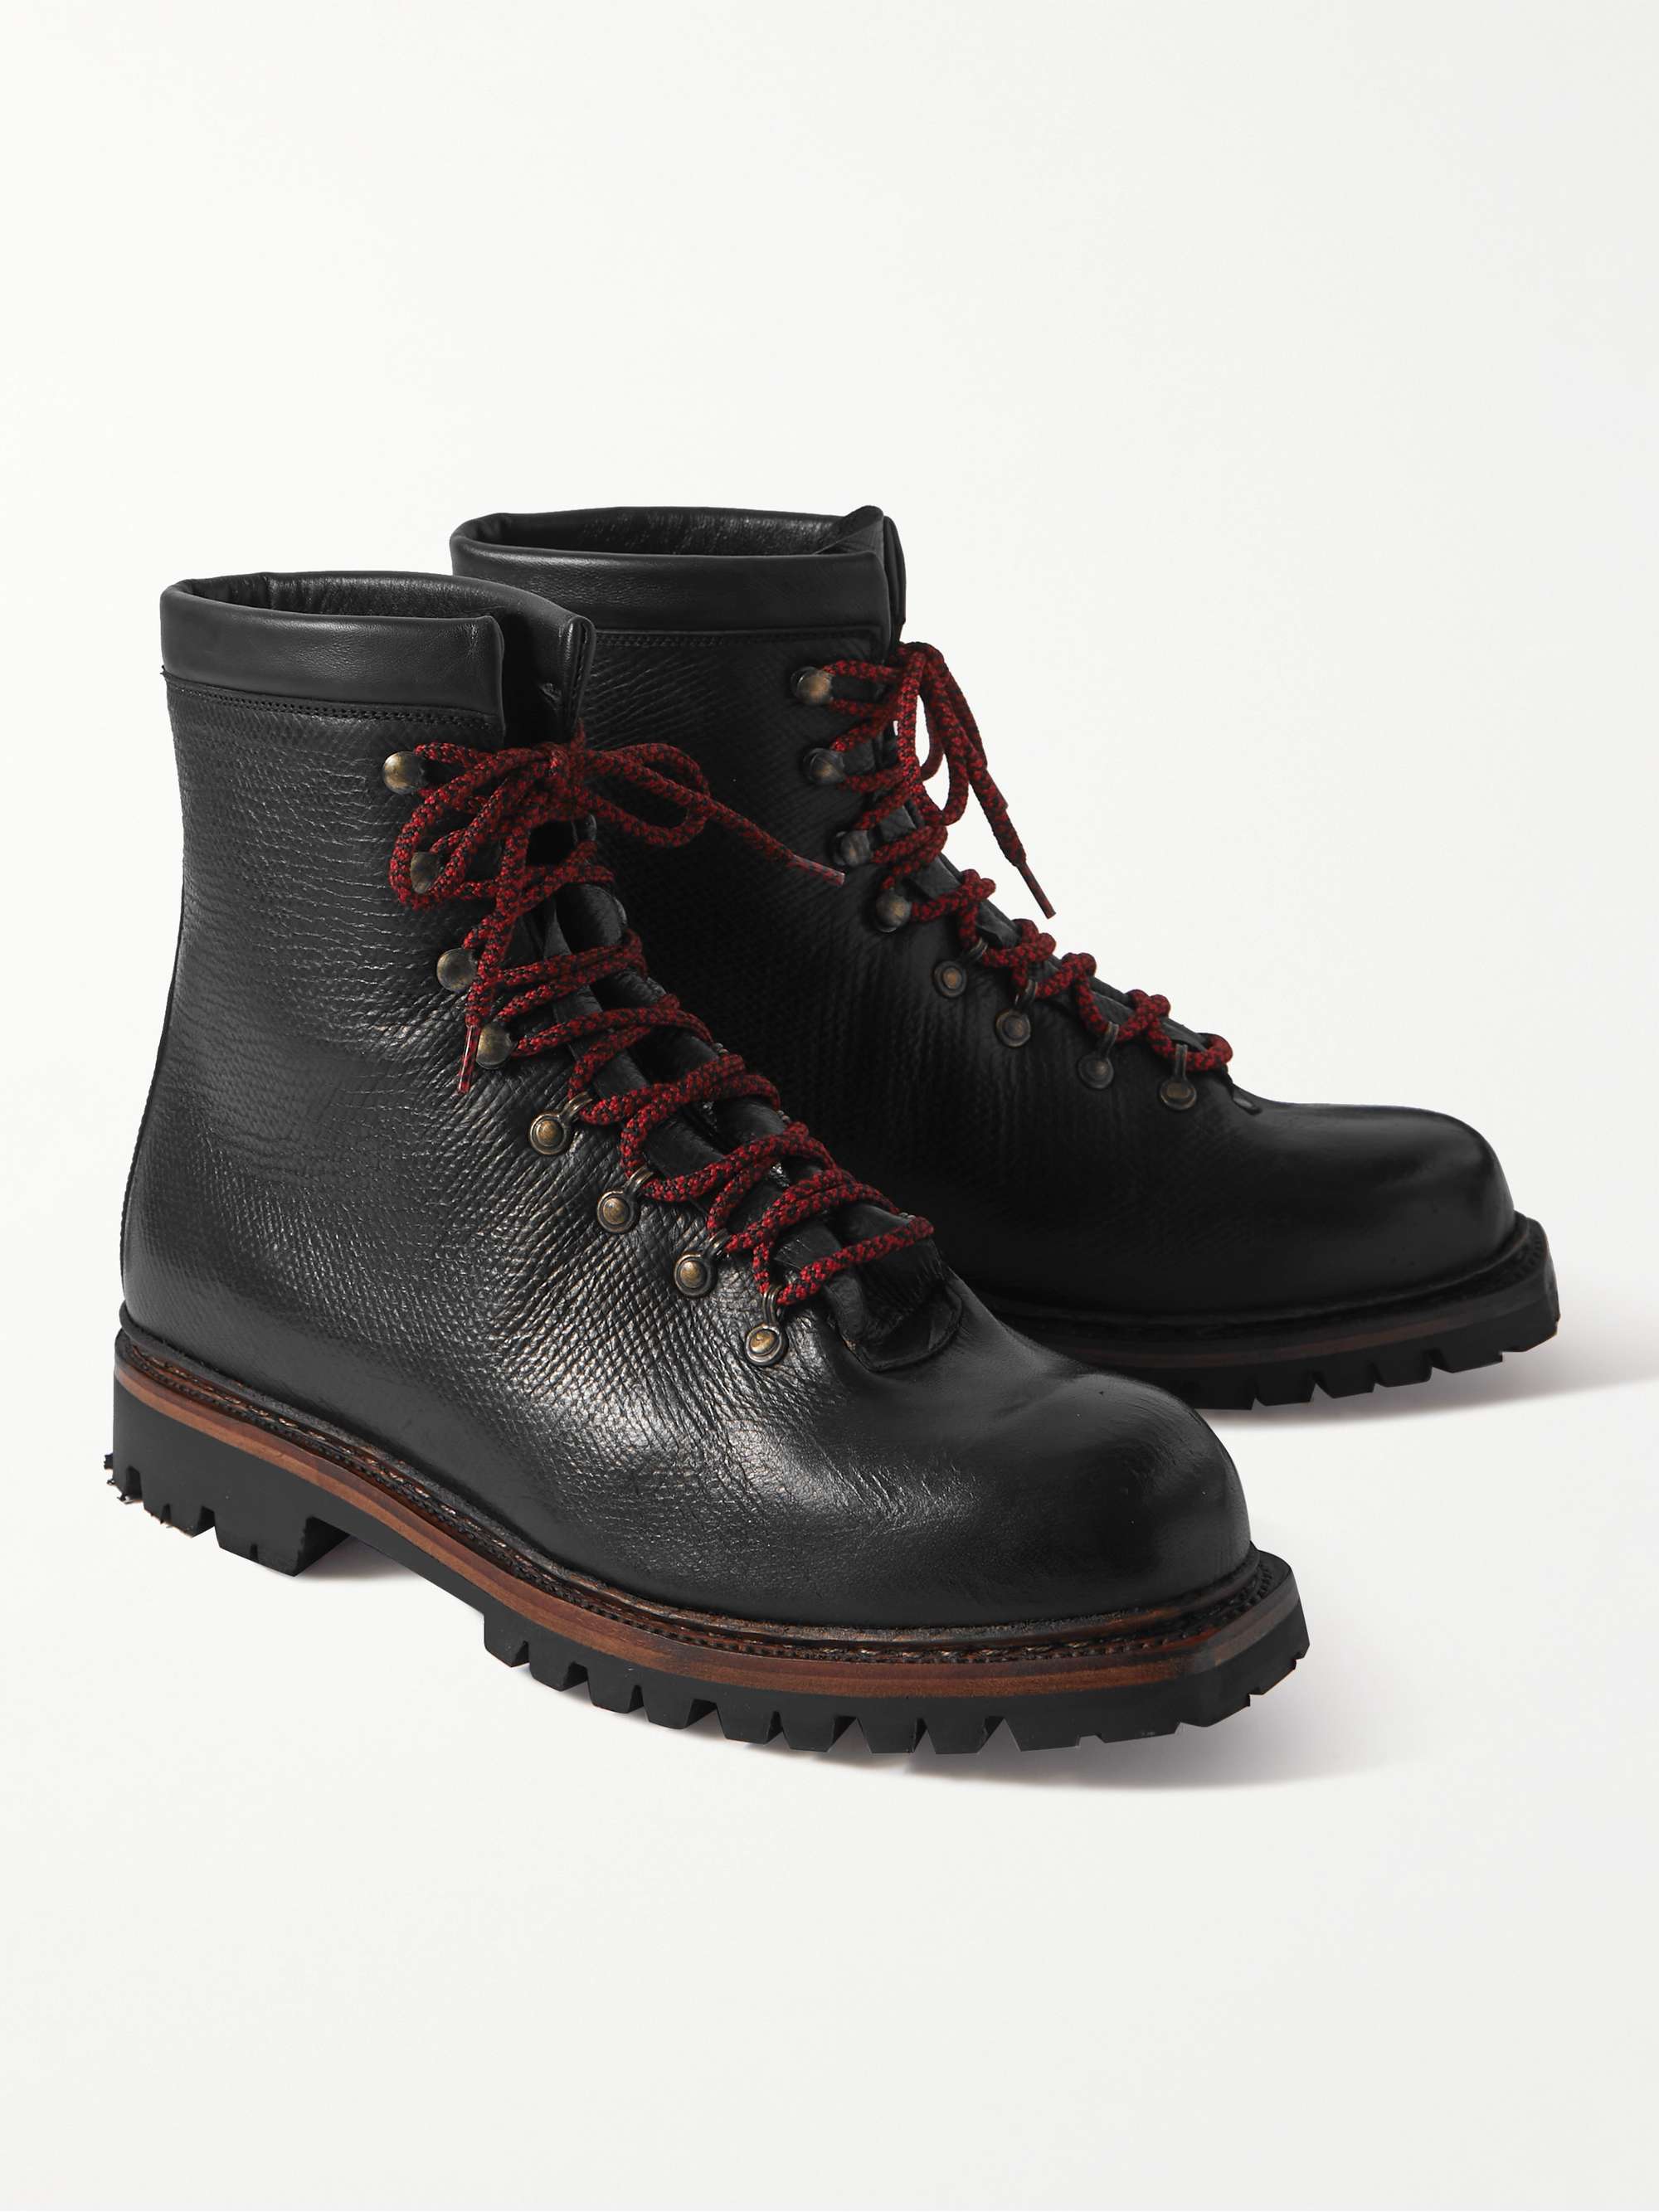 GEORGE CLEVERLEY Full-Grain Leather Boots